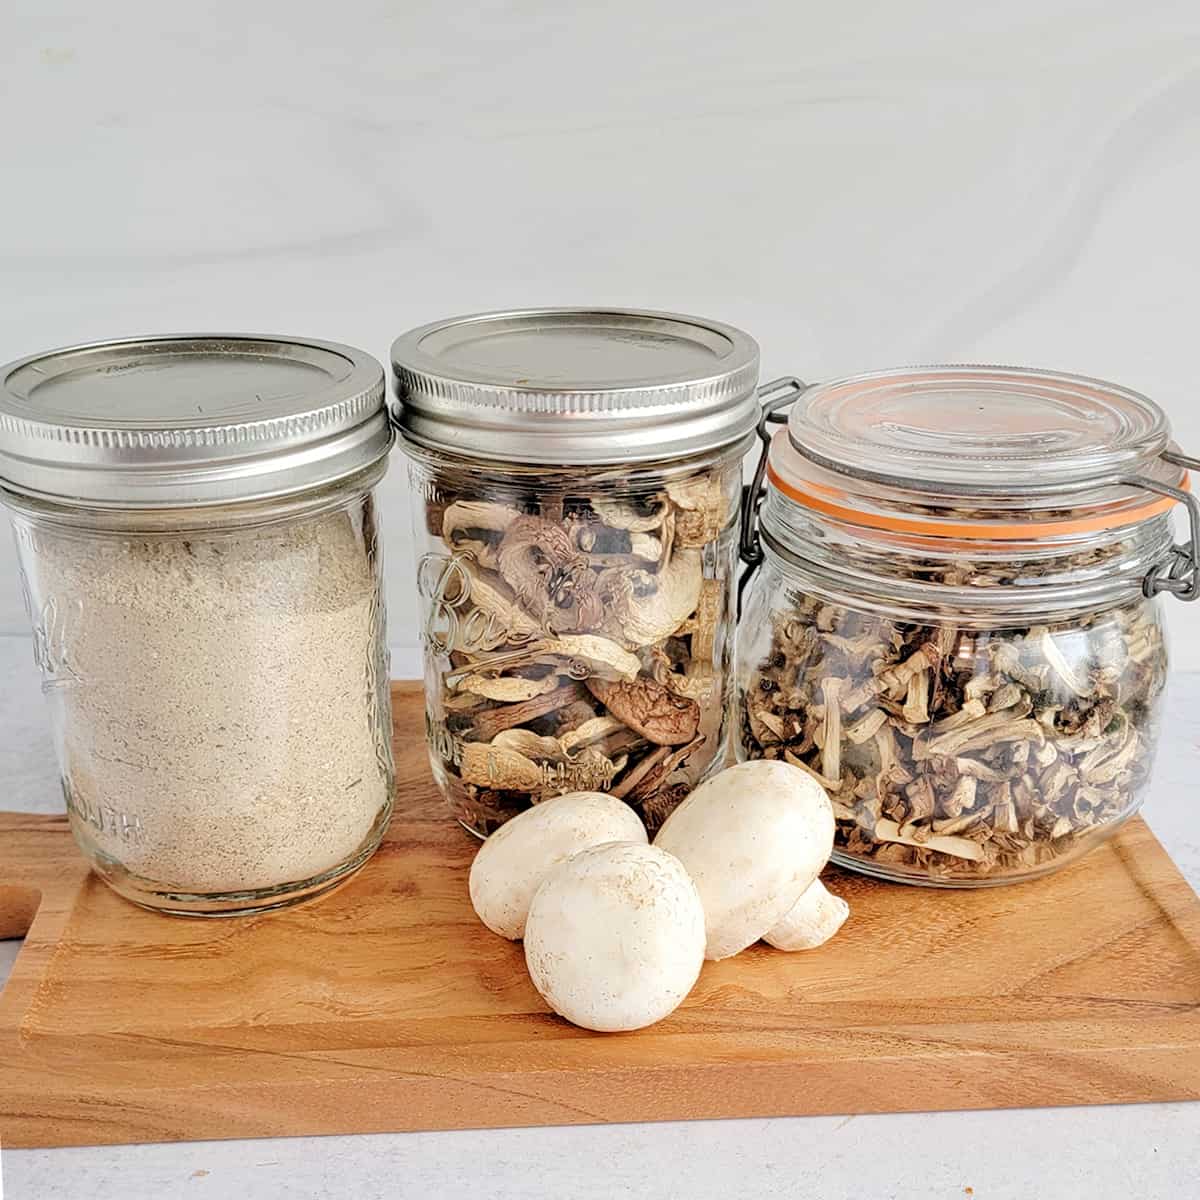 Canning Mushrooms - How to Make Your Own Canned Mushrooms